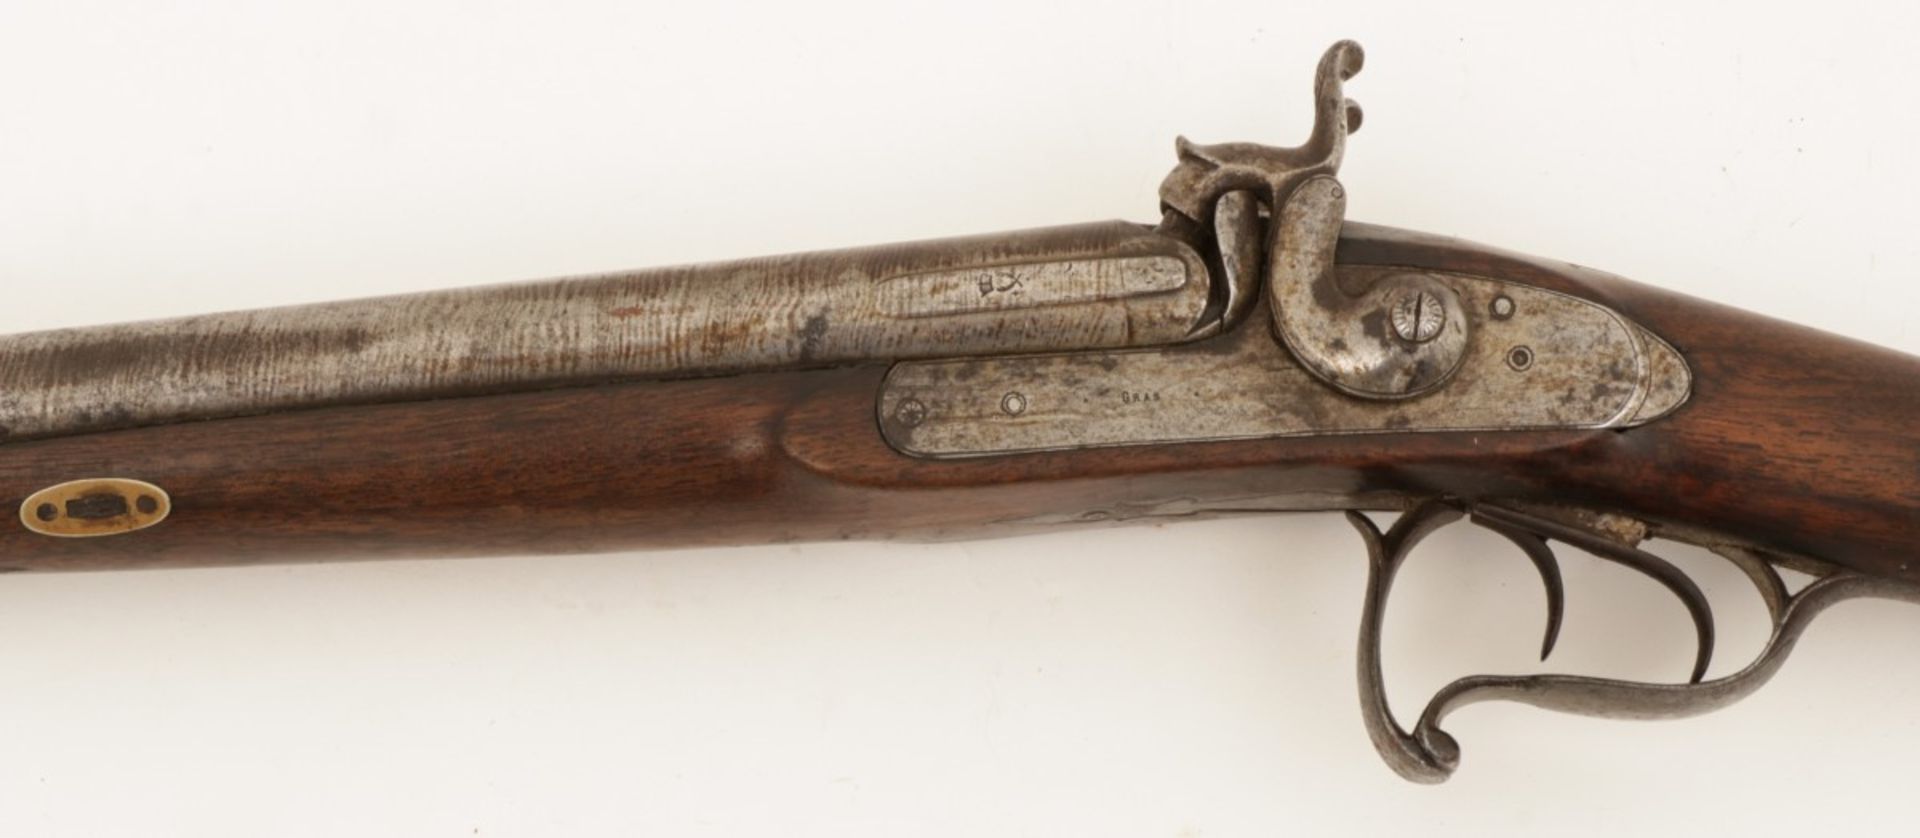 A MAS percussion rifle, France, late 19th century. - Image 2 of 4